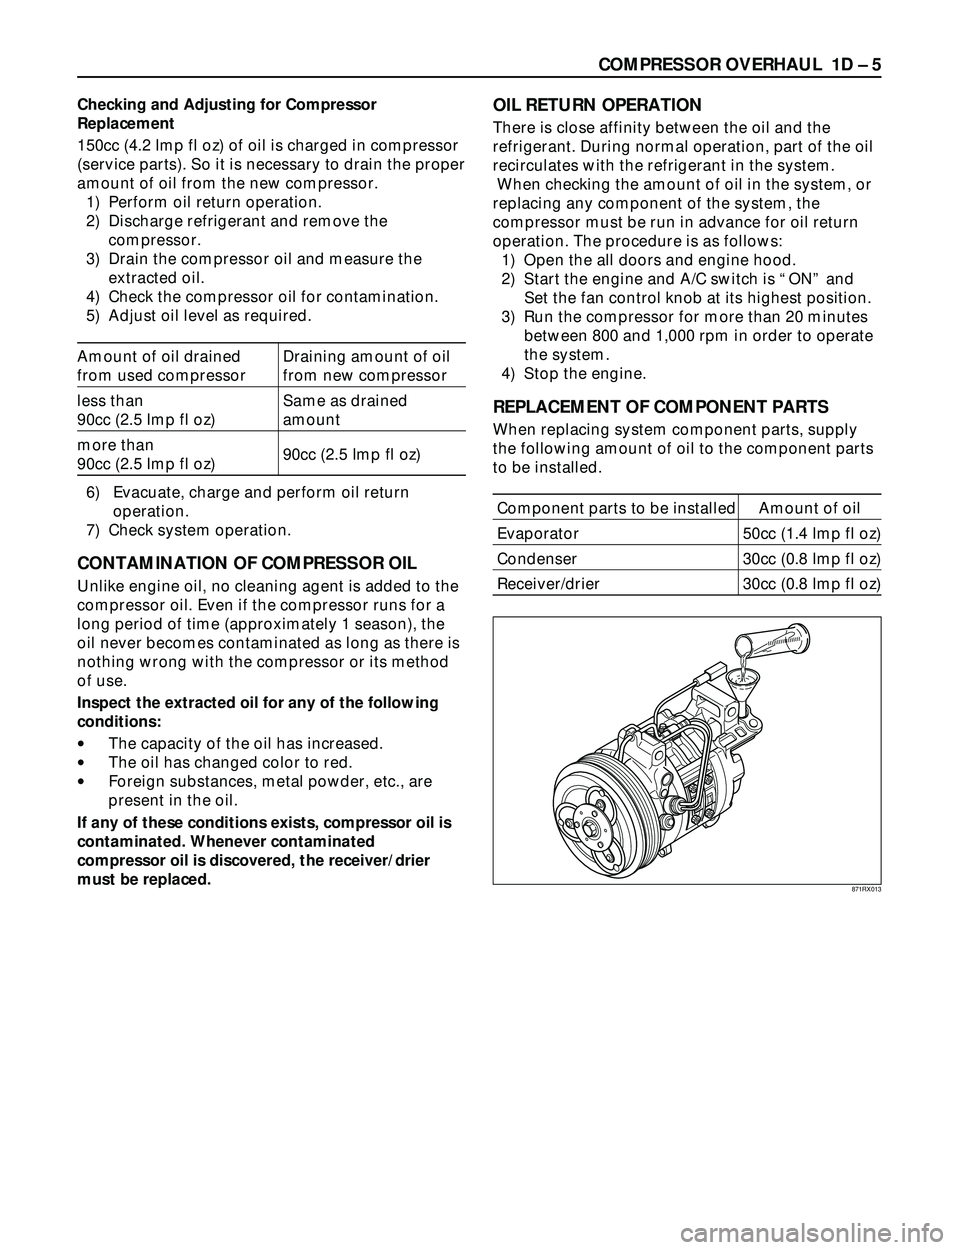 ISUZU TROOPER 1998  Service Repair Manual COMPRESSOR OVERHAUL  1D Ð 5
Checking and Adjusting for Compressor
Replacement
150cc (4.2 Imp fl oz) of oil is charged in compressor
(service parts). So it is necessary to drain the proper
amount of o